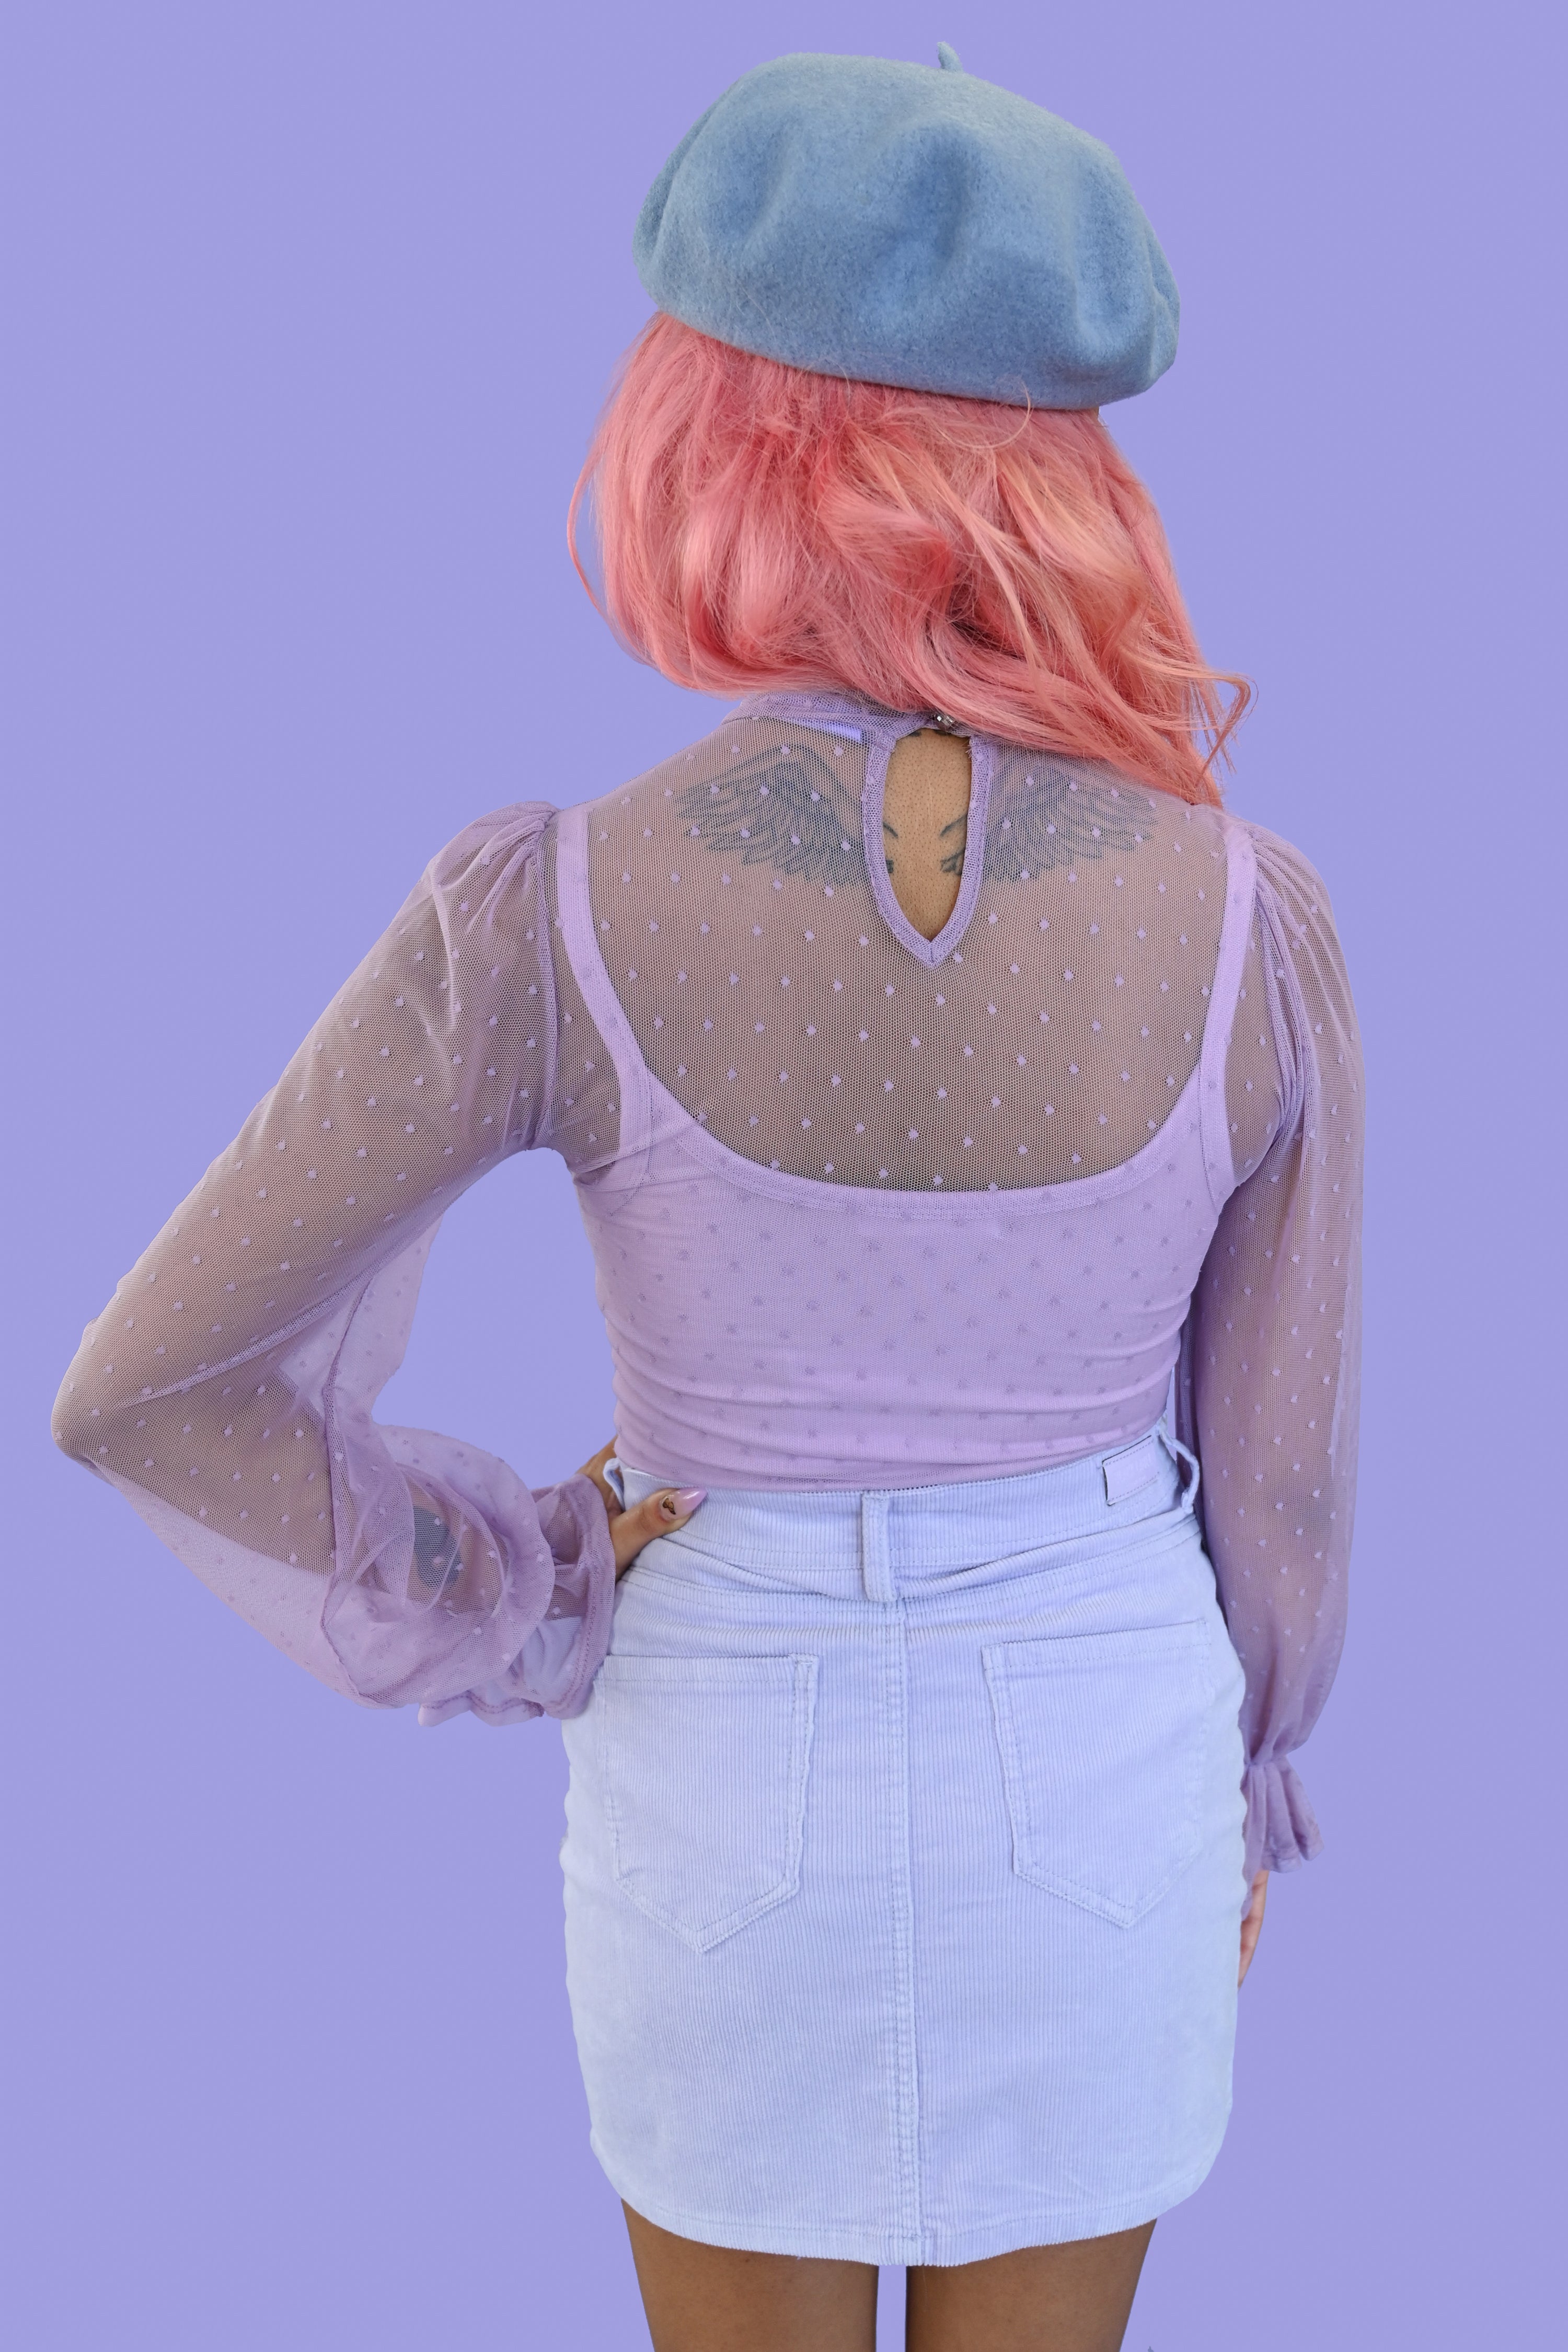 sheer lavender polka dot blouse with ruffled sleeves and peephole button closure on back